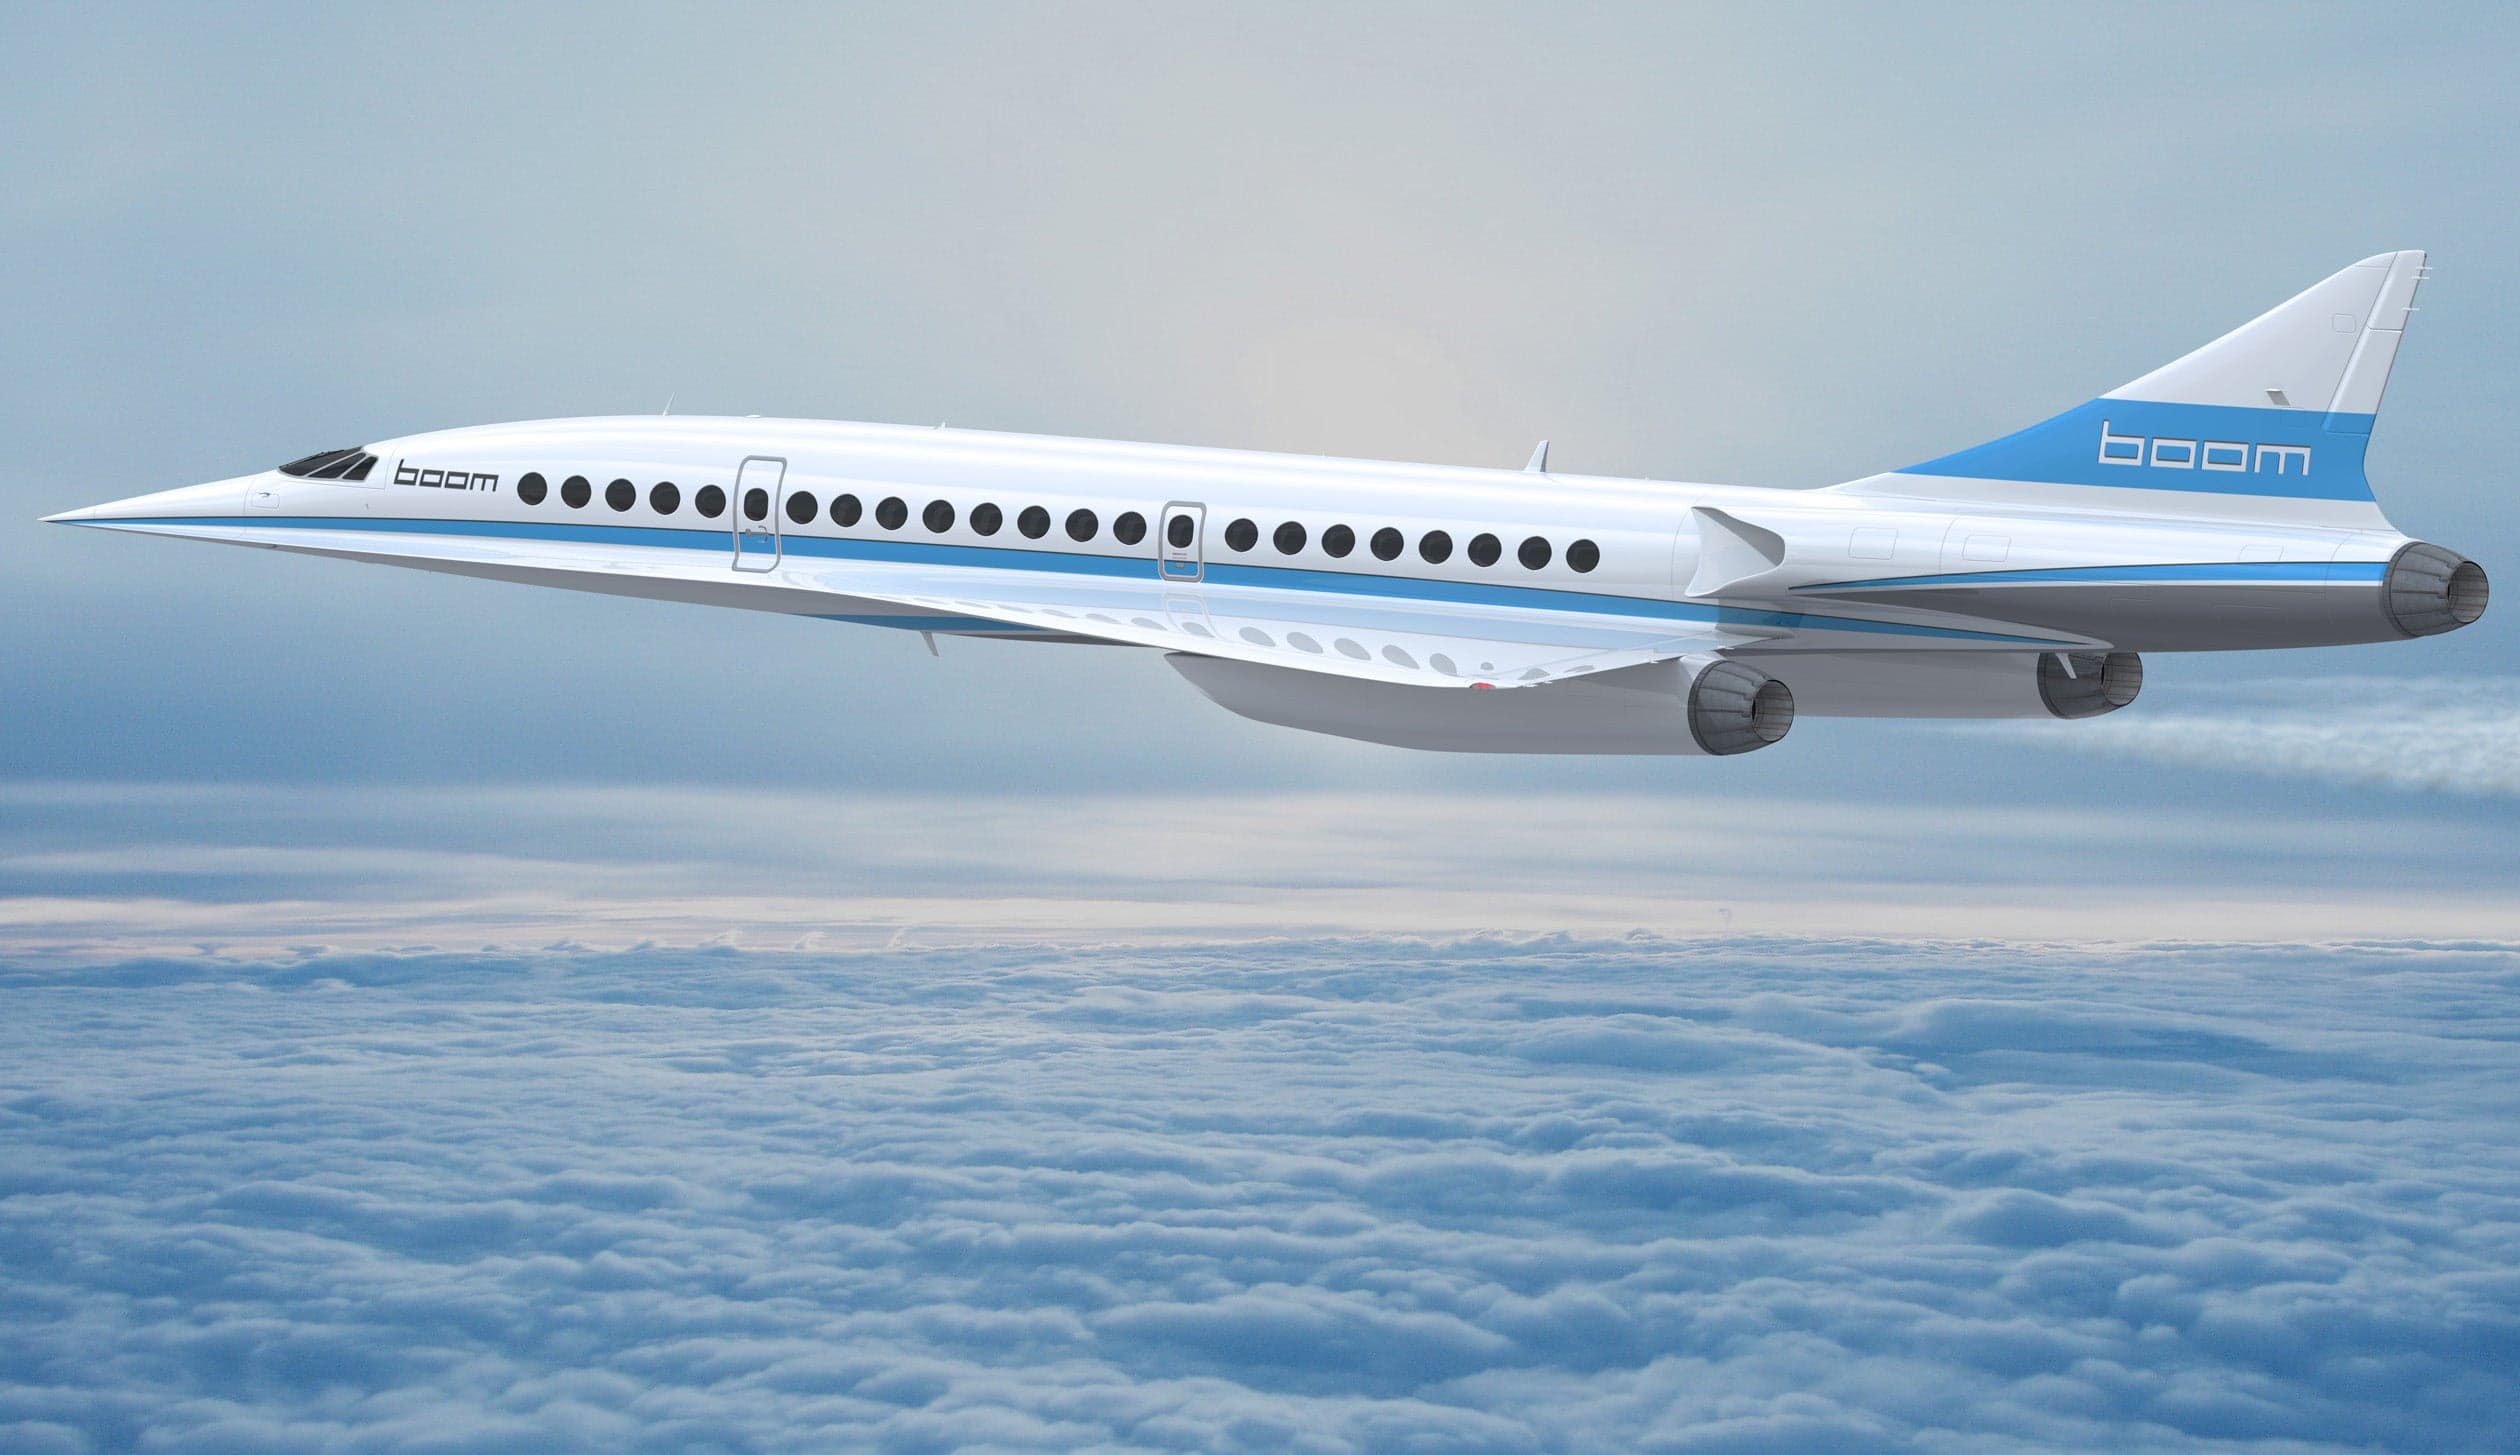 This Company Wants to Develop Planes That Go From NYC to London in About 3 Hours